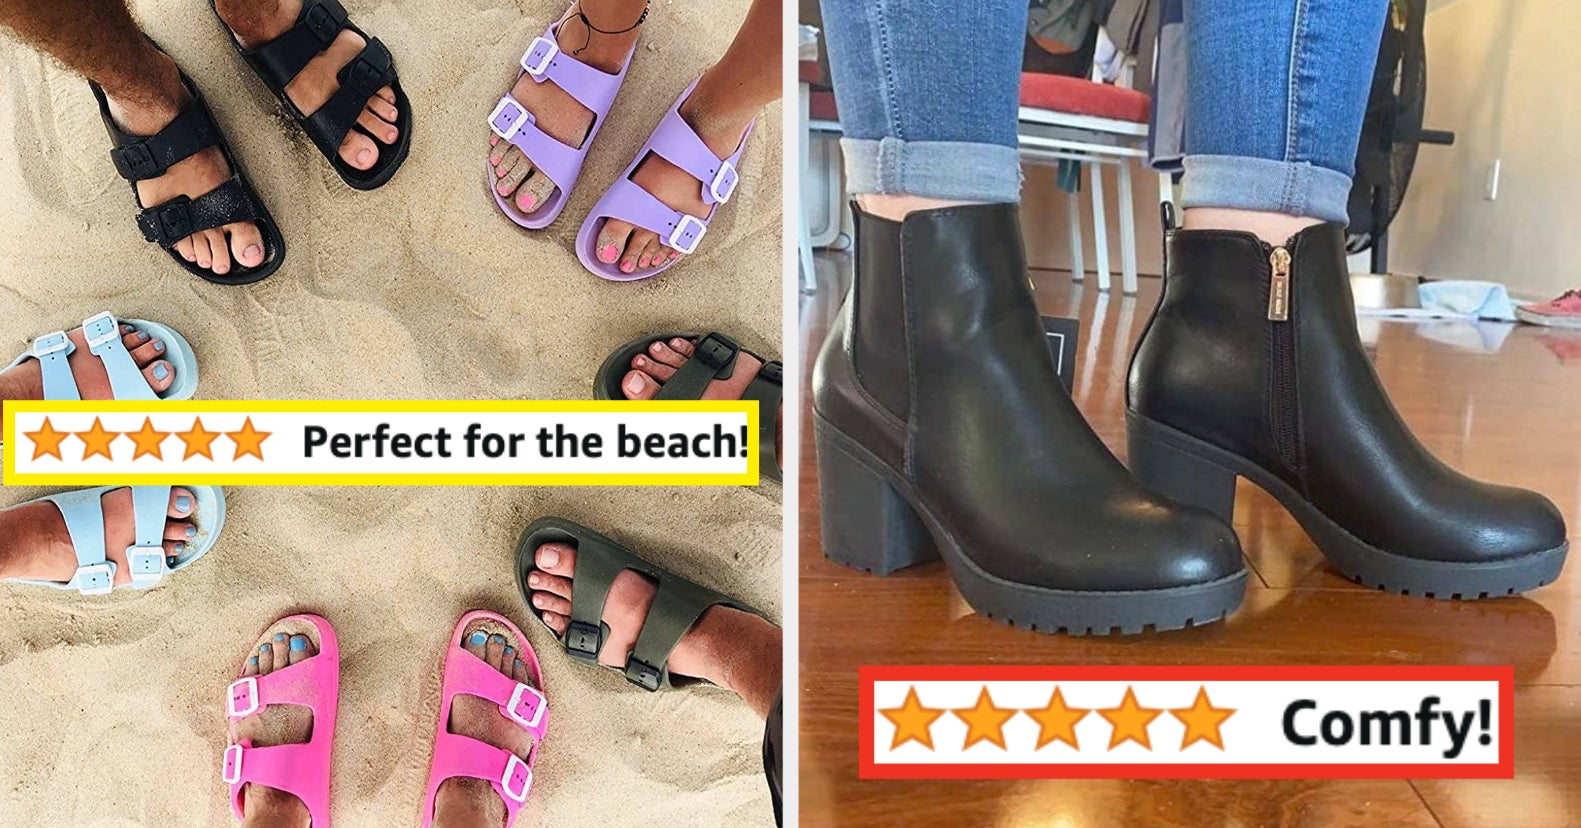 Birkenstock Sandals For Every Outfit - Steph Social